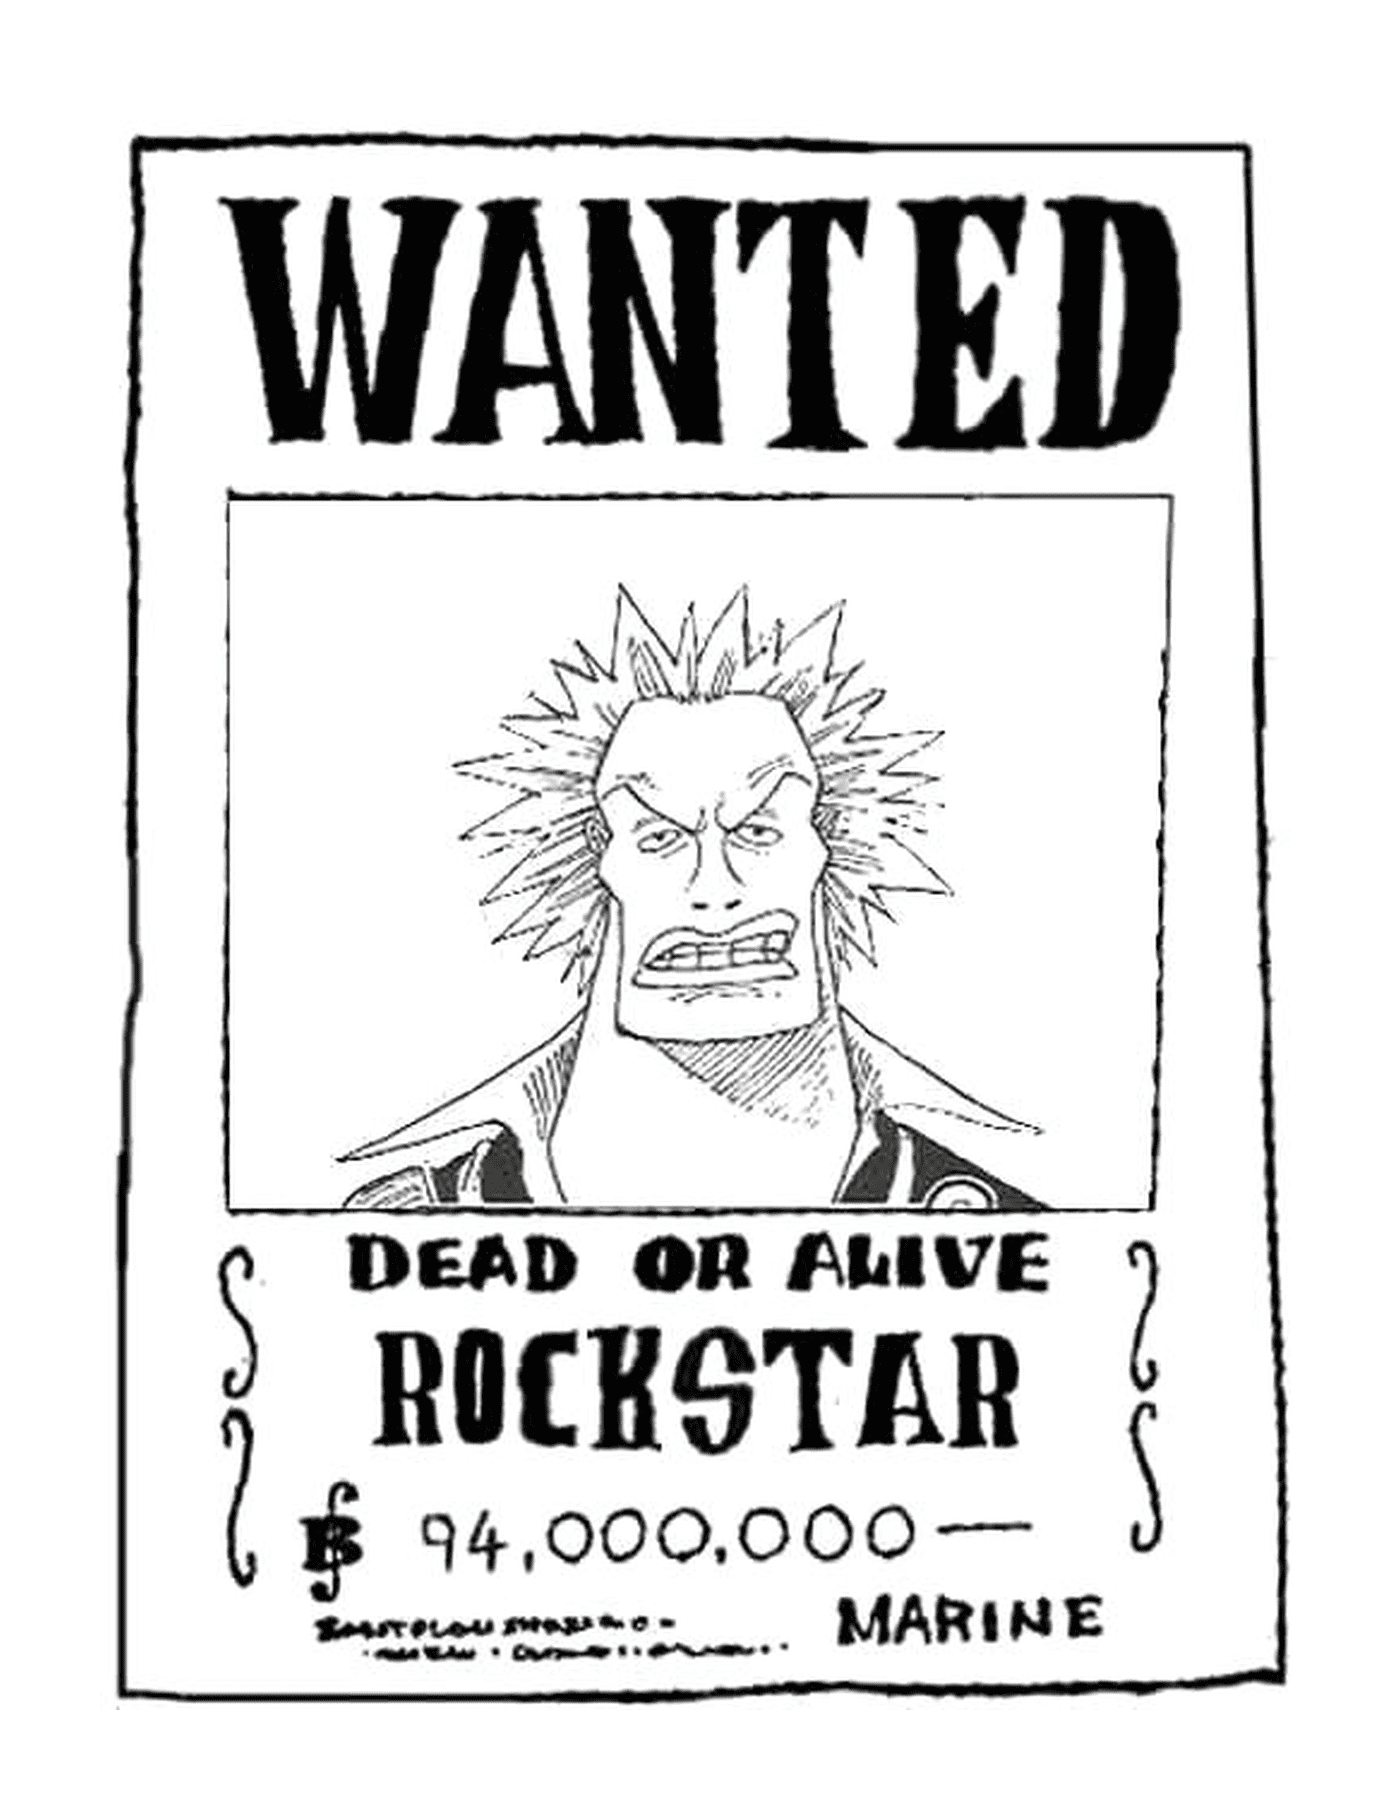  Wanted Rockstar, dead or alive 